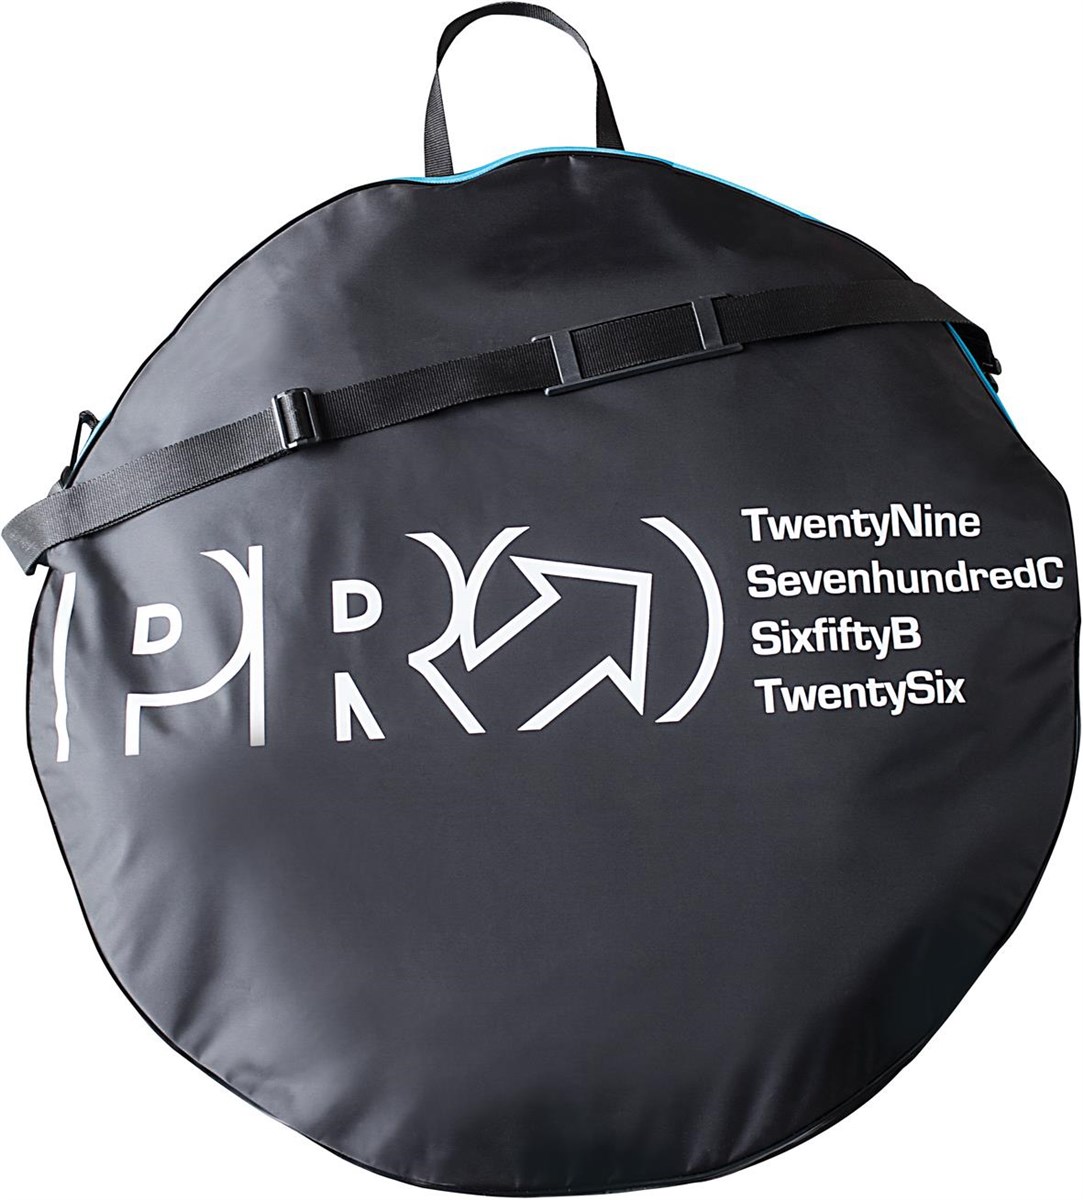 Pro Double Wheel Bag To Fit Up To 29 Inch Wheels